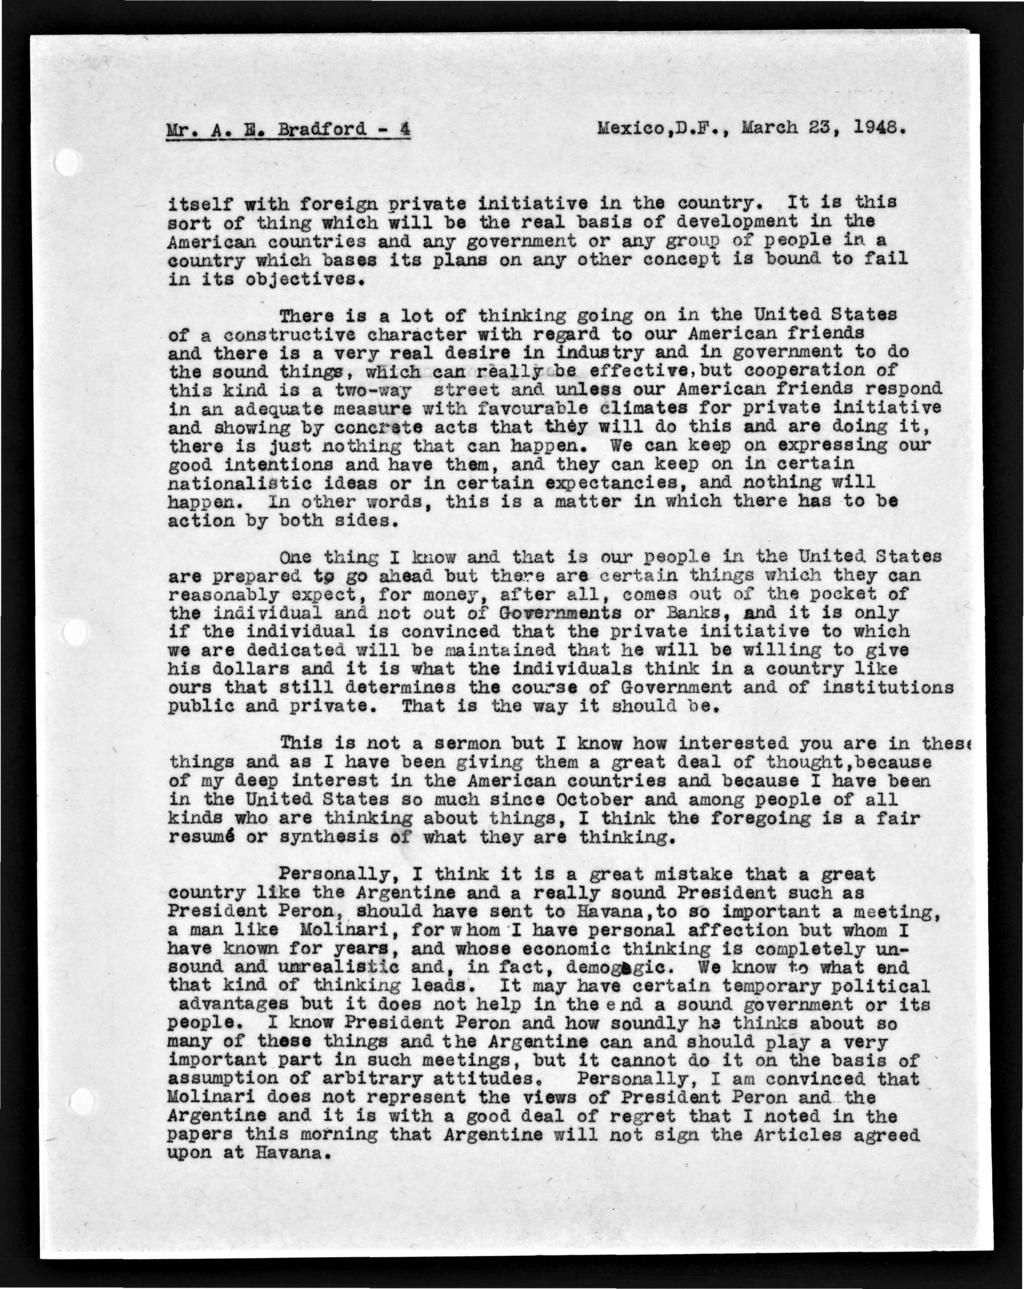 Mr. A. B. Bradford - 4 Mexico,D.F.t March 23, 1948. itself with foreign private initiative in the country.